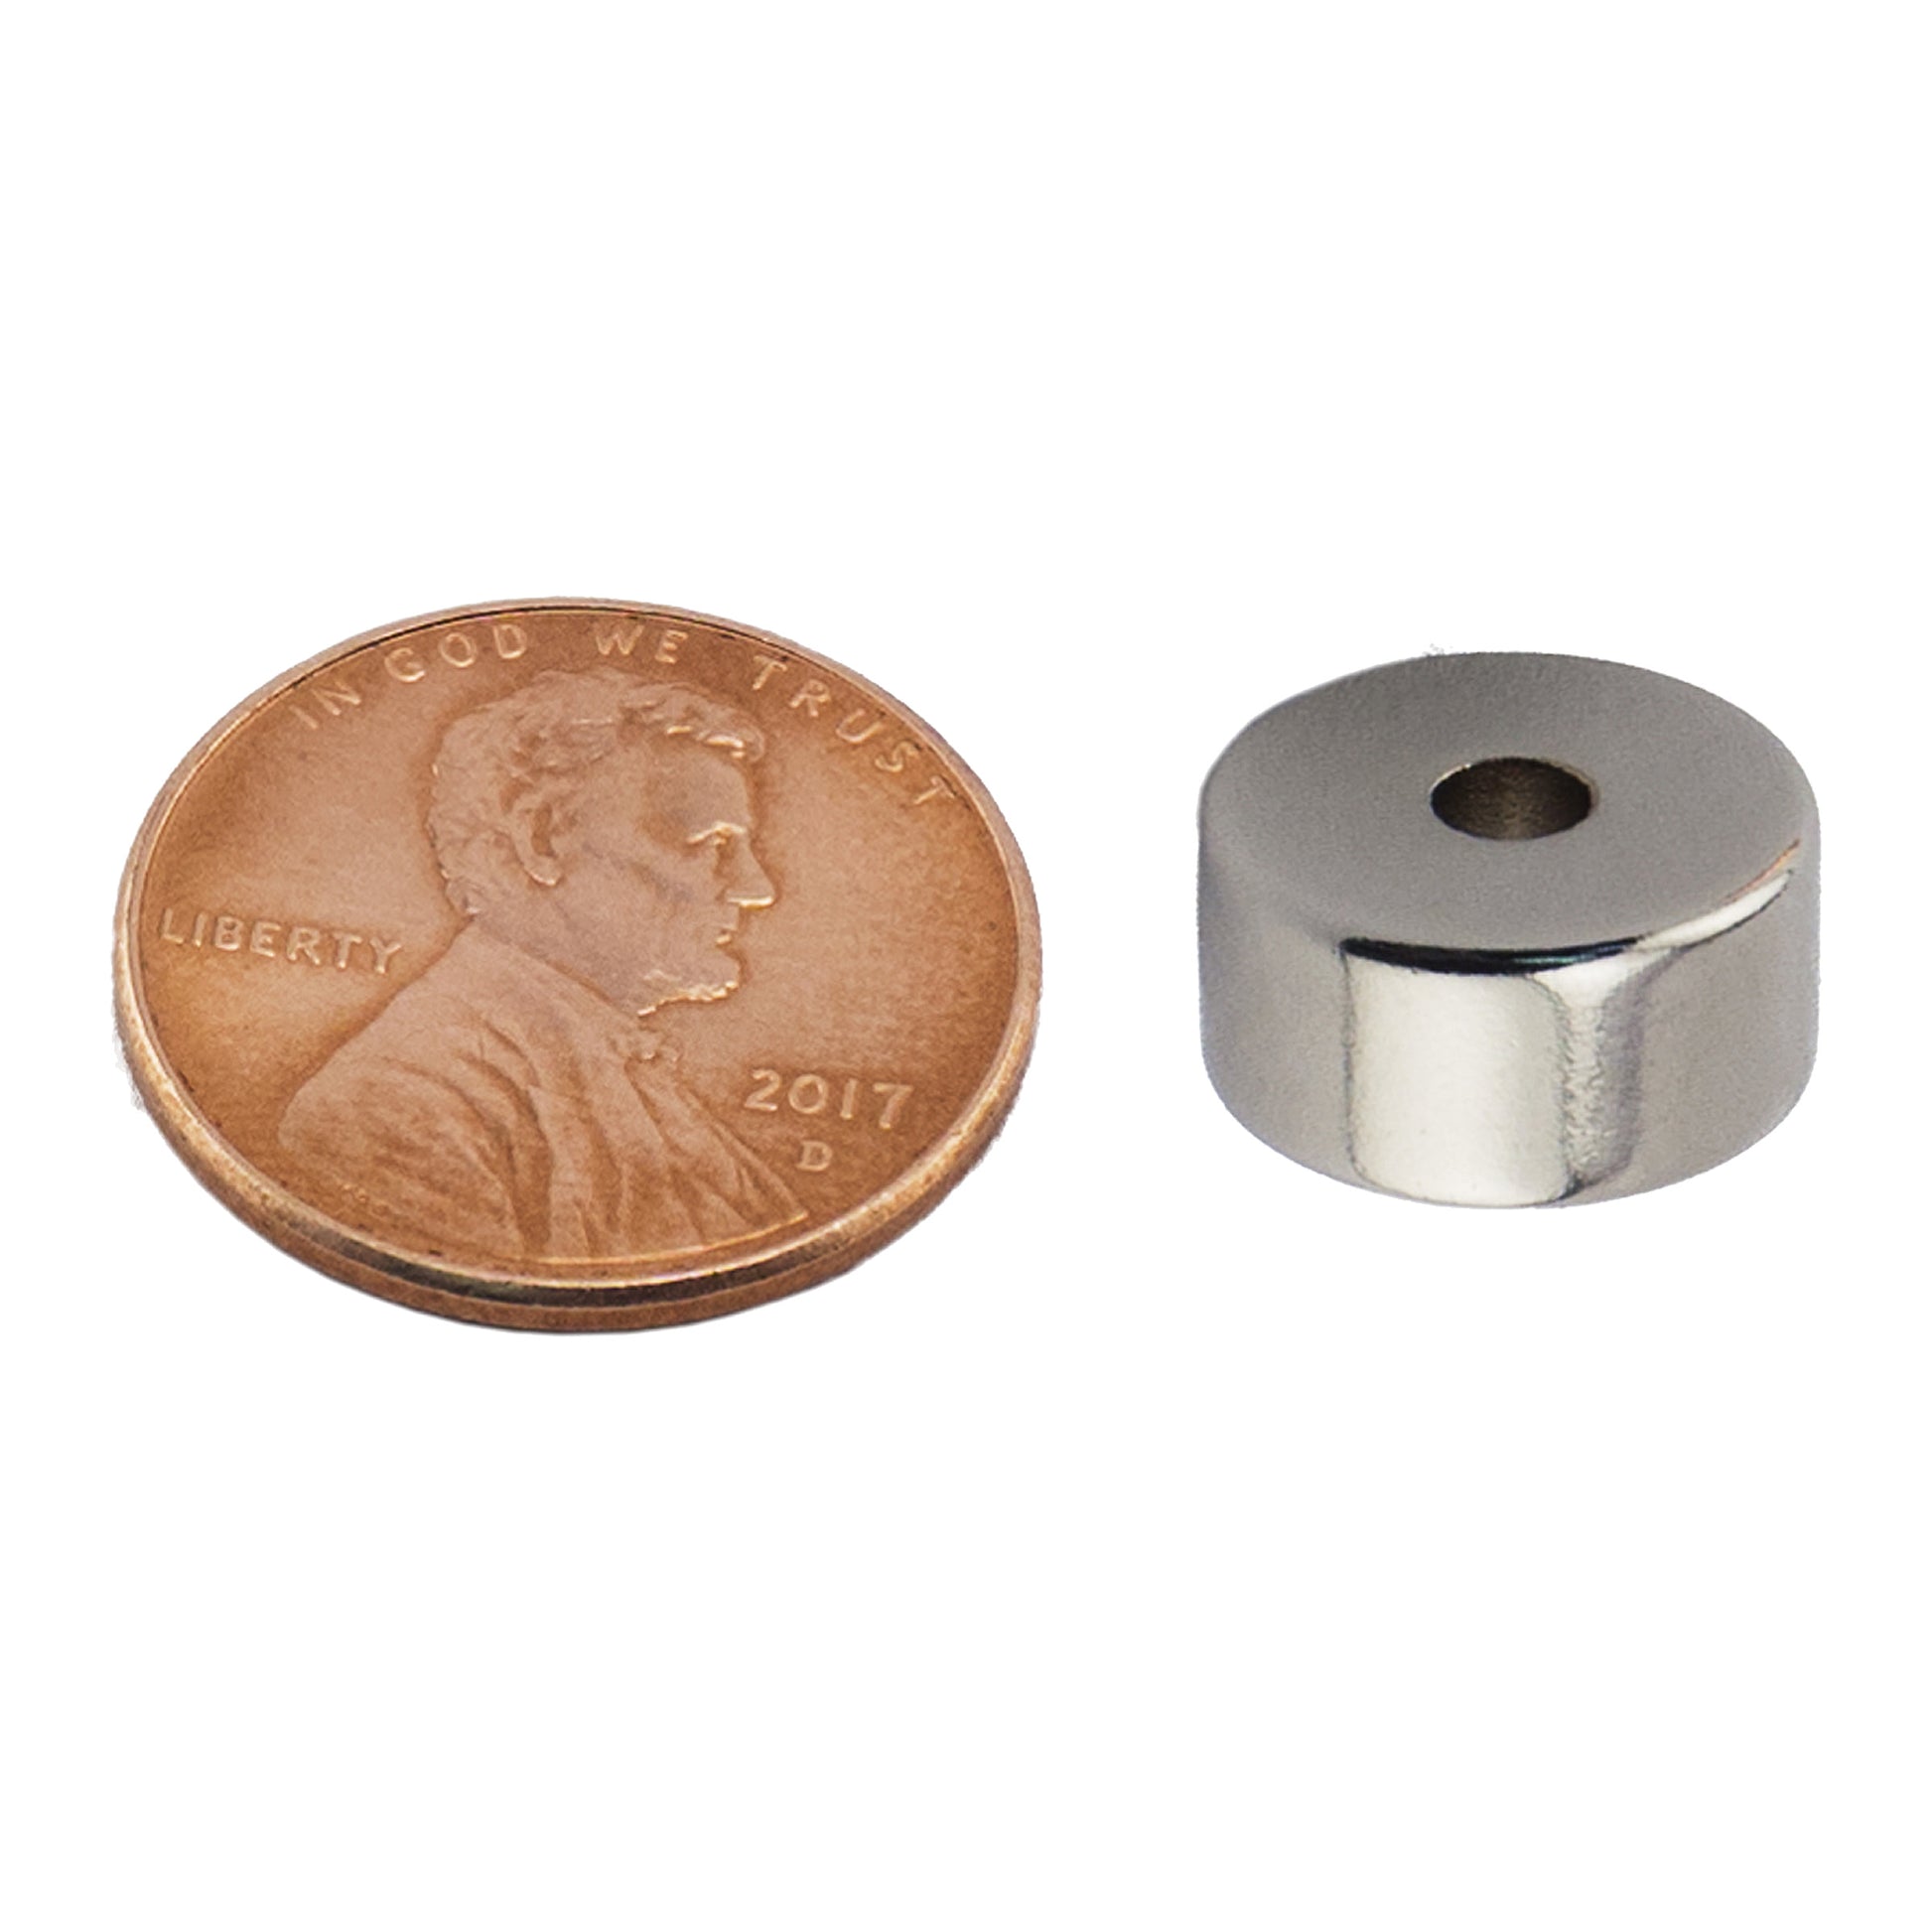 Load image into Gallery viewer, NR005031NS01 Neodymium Ring Magnet - Compared to Penny for Size Reference